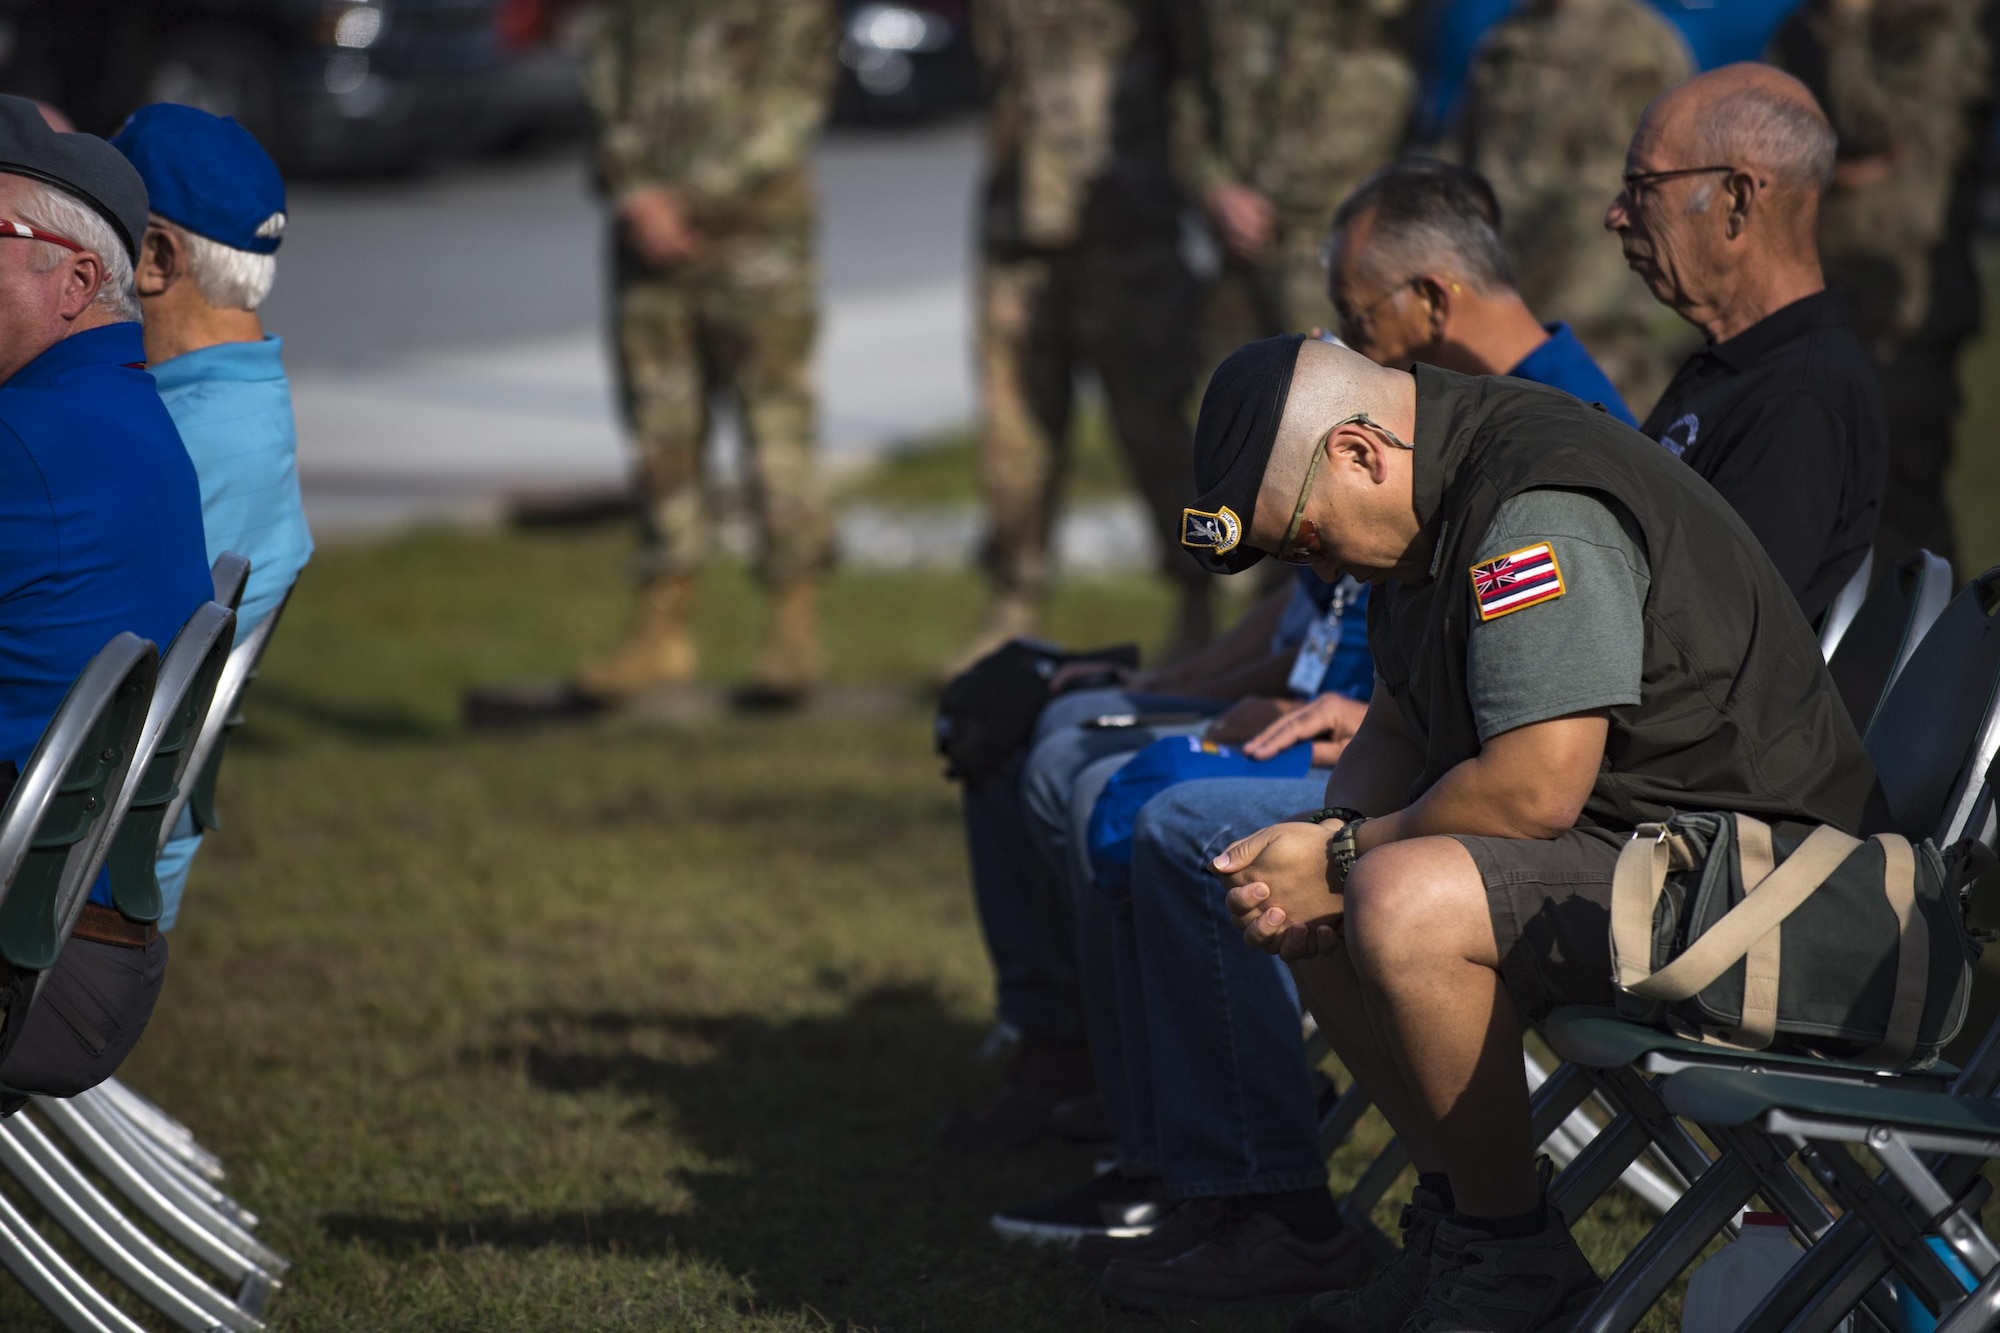 Retired Master Sgt. Baron Acosta puts his head down for a moment during a Safeside memorial service, Nov. 8, 2017, at Moody Air Force Base, Ga. Safeside reunions are biennial and scheduled around the 820th Base Defense Group’s high-ops tempo. (U.S. Air Force photo by Senior Airman Daniel Snider)